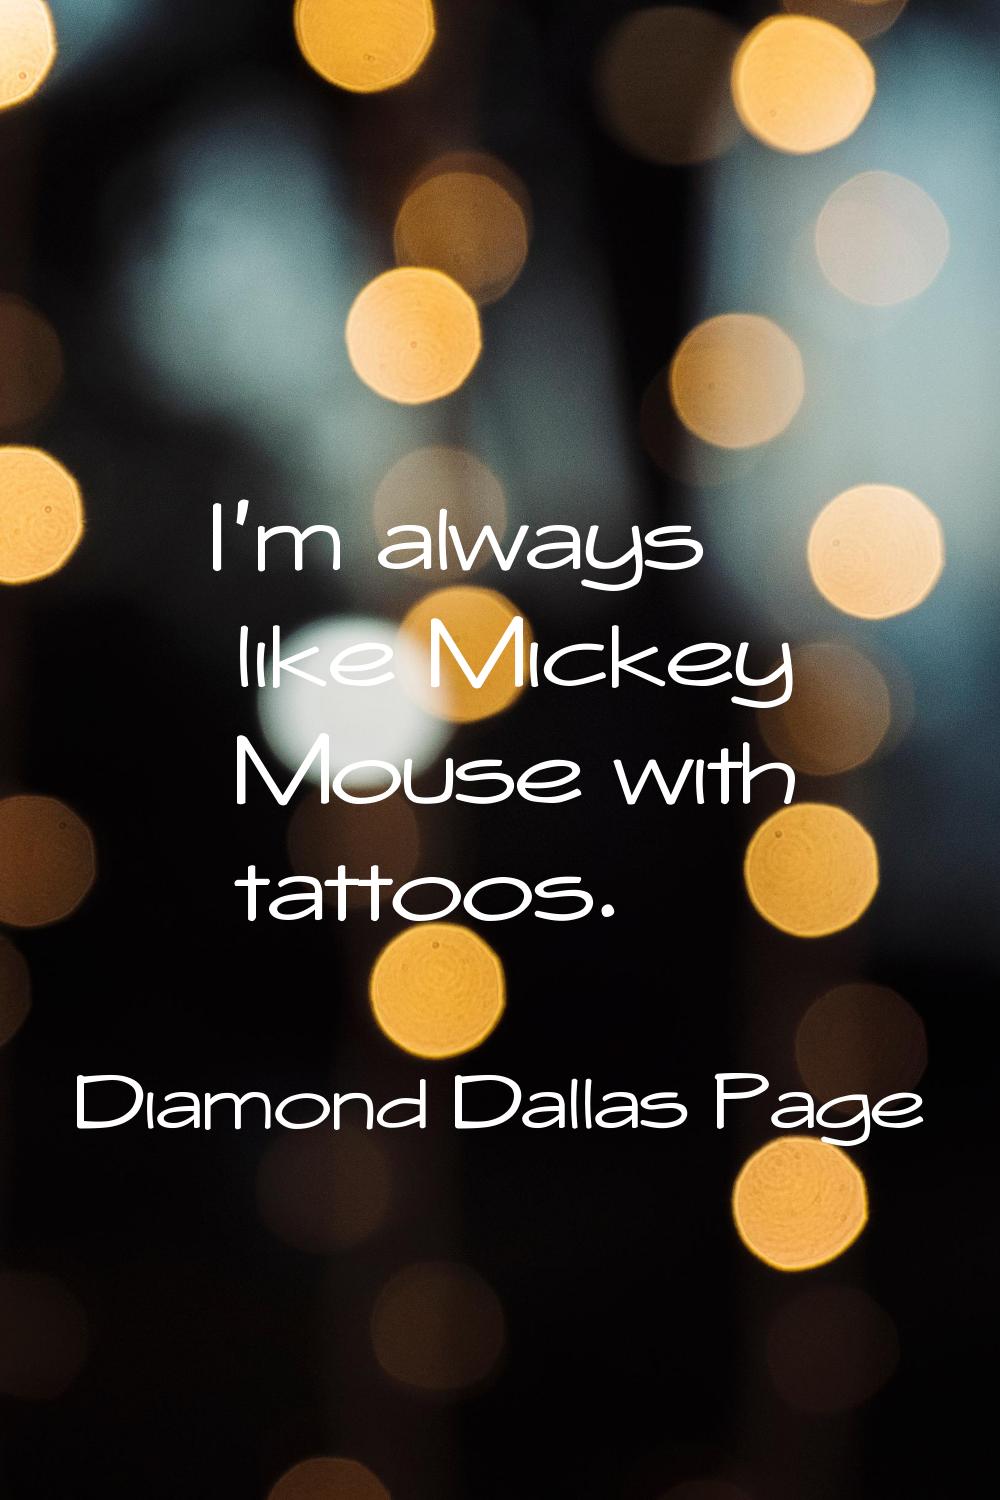 I'm always like Mickey Mouse with tattoos.